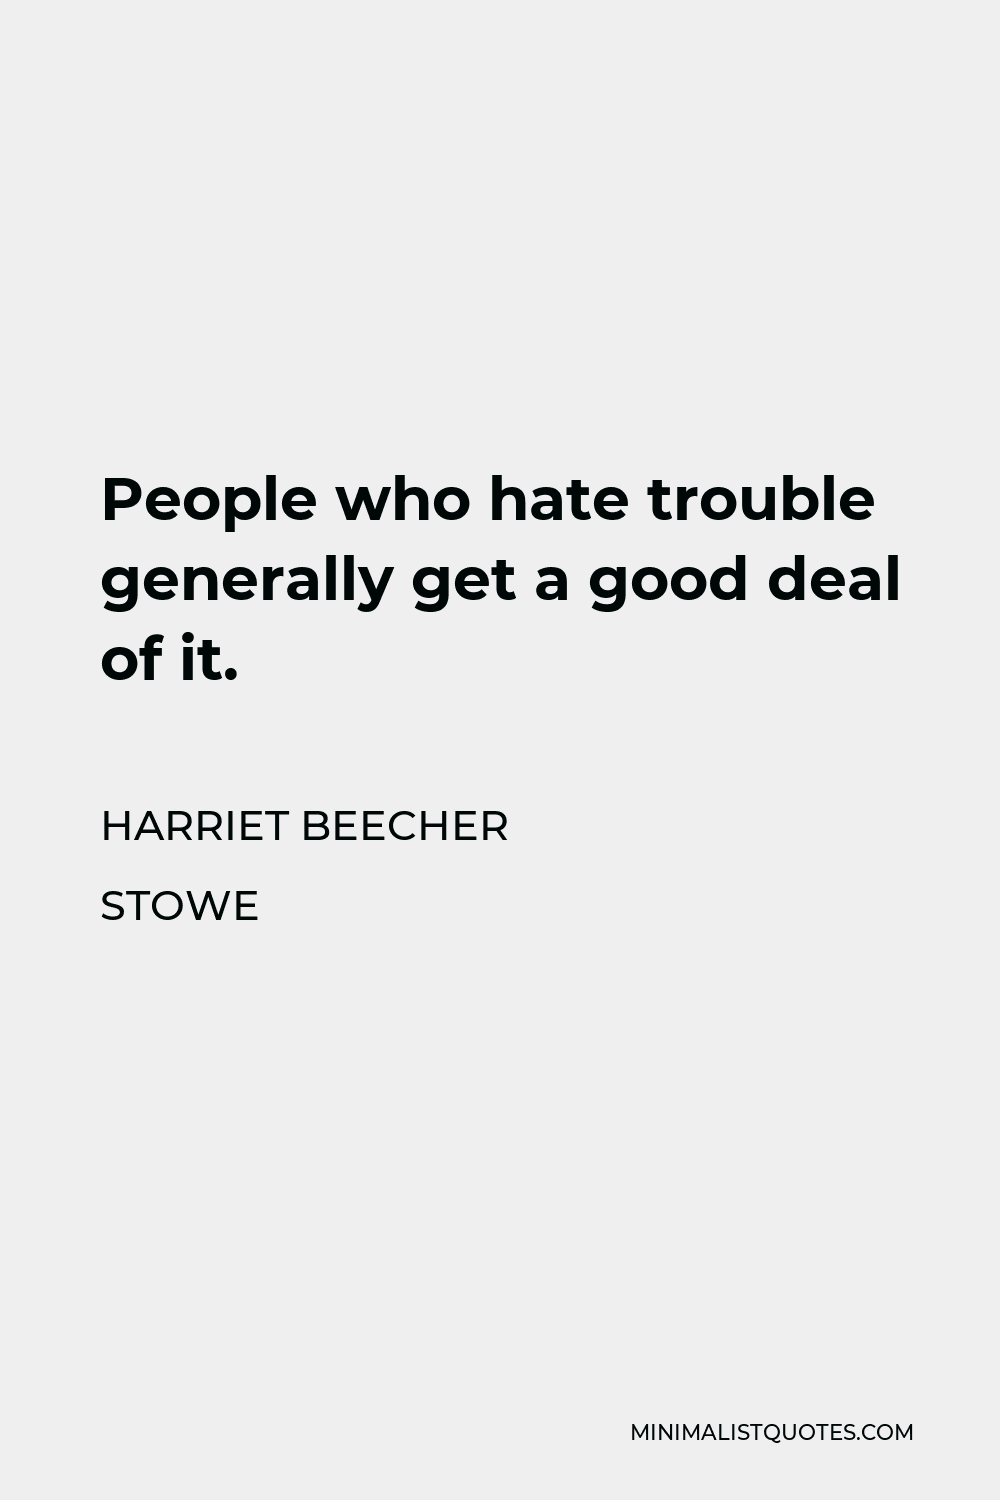 Harriet Beecher Stowe Quote - People who hate trouble generally get a good deal of it.